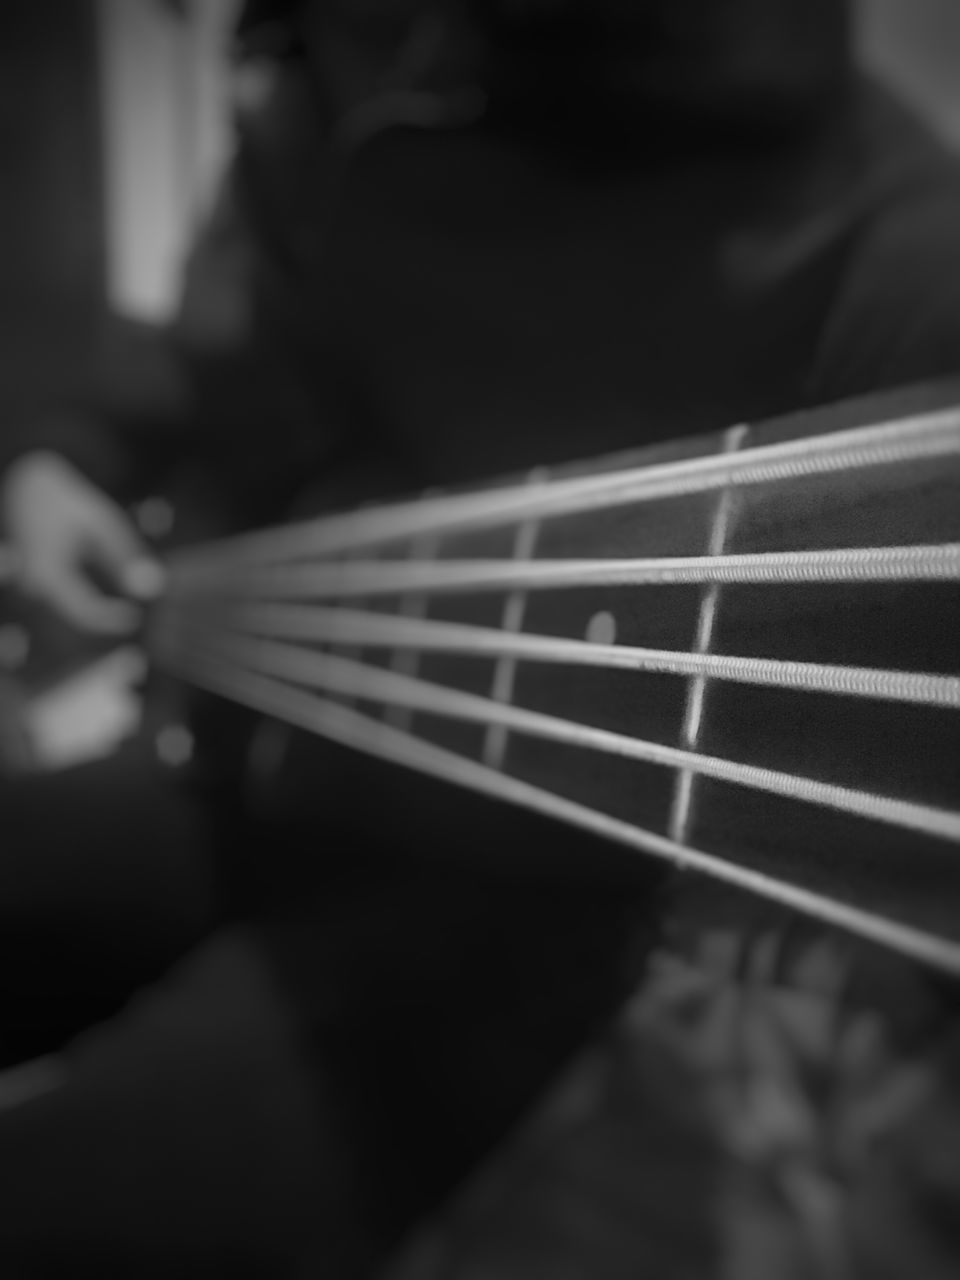 string instrument, guitar, music, musical instrument, arts culture and entertainment, human hand, string, hand, selective focus, indoors, real people, one person, musical instrument string, fretboard, musical equipment, lifestyles, close-up, human body part, playing, leisure activity, acoustic guitar, finger